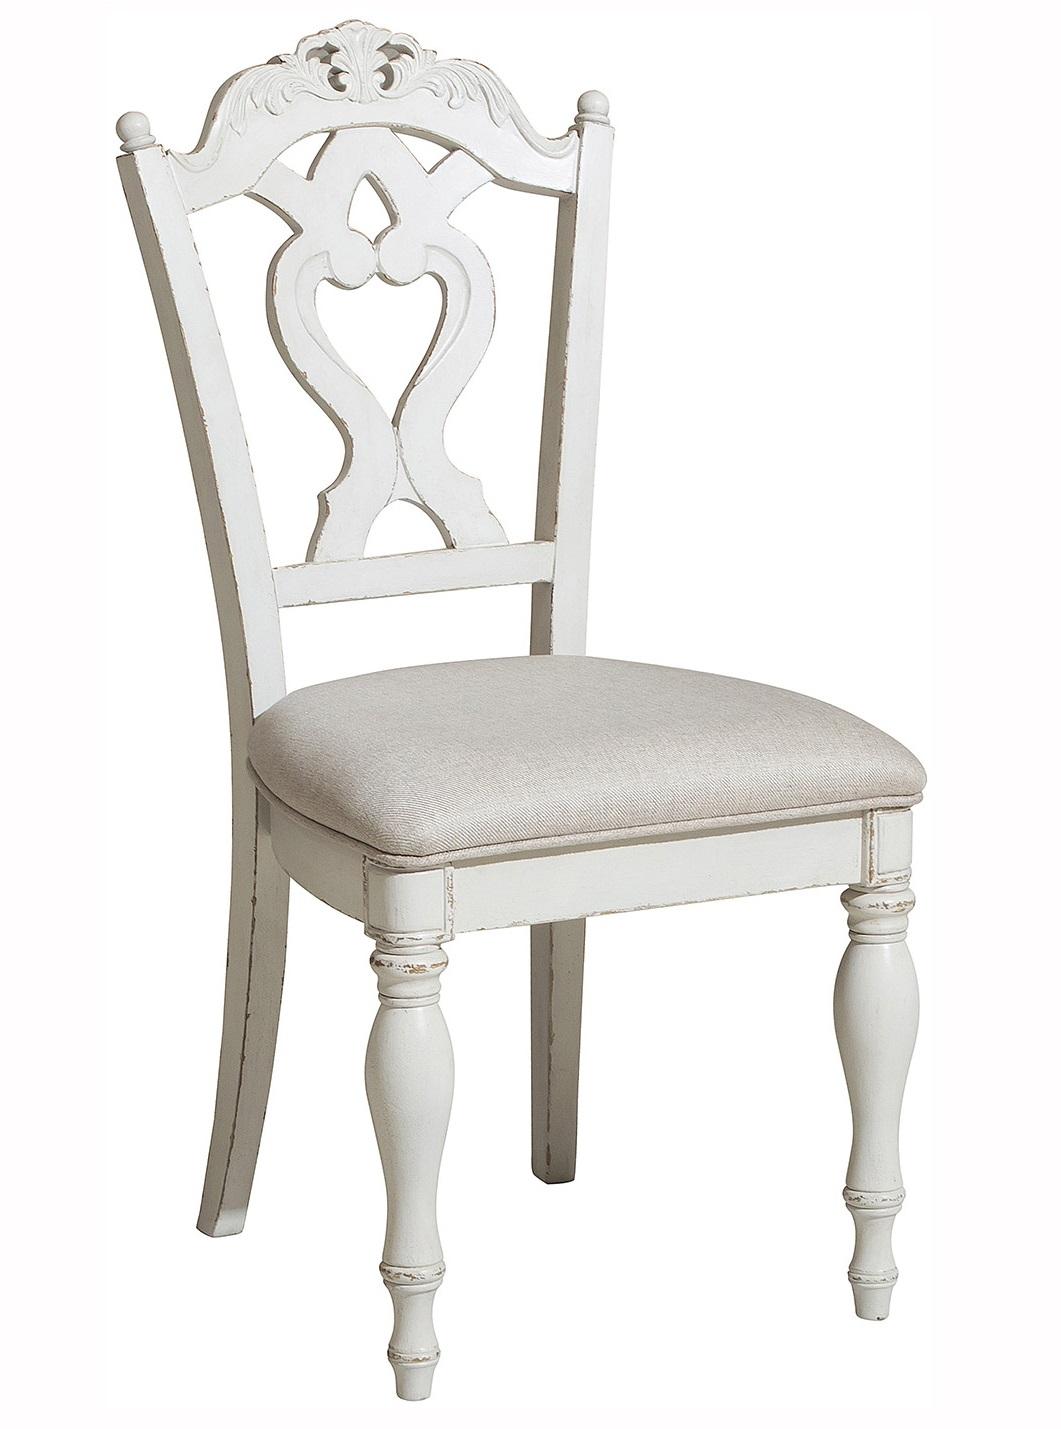 Homelegance Cinderella Chair in Antique White with Grey Rub-Through 1386NW-11C - Las Vegas Furniture Stores